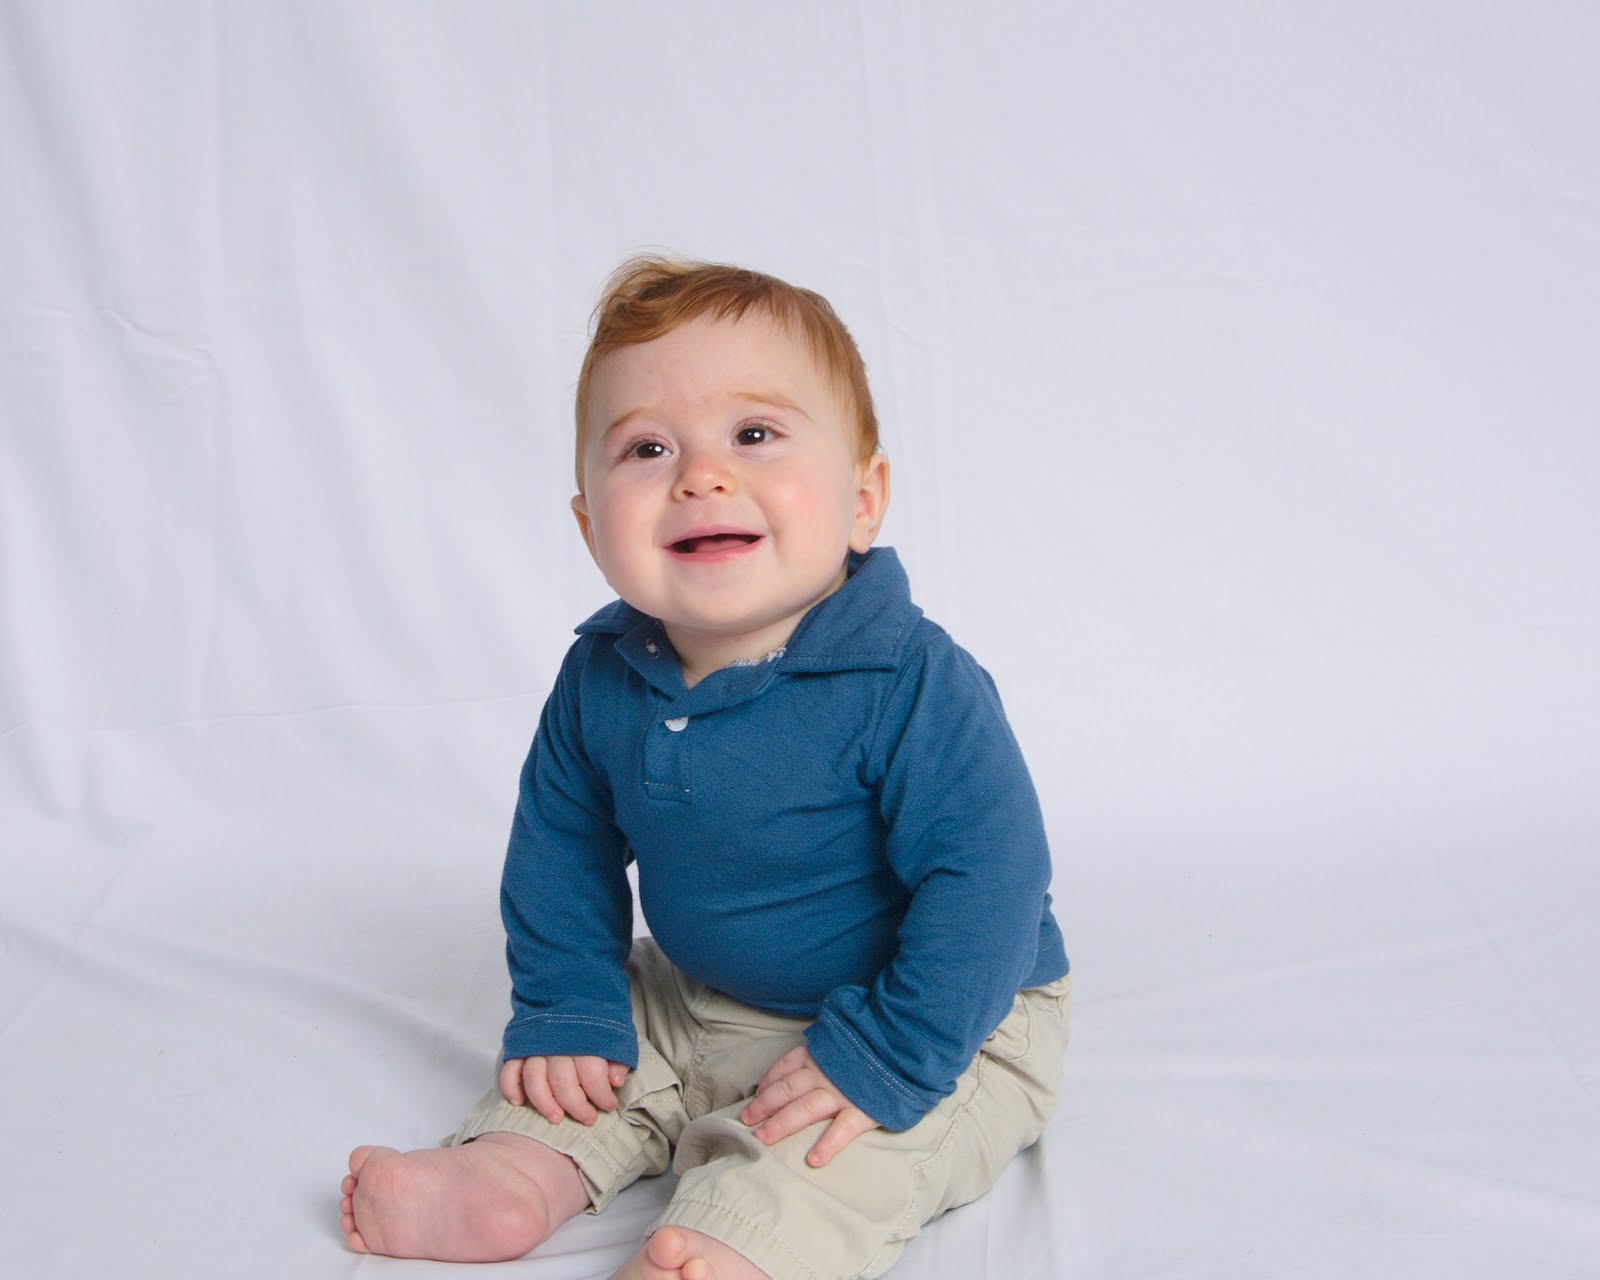 Our New Addition: My 1st JC Penney photo shoot